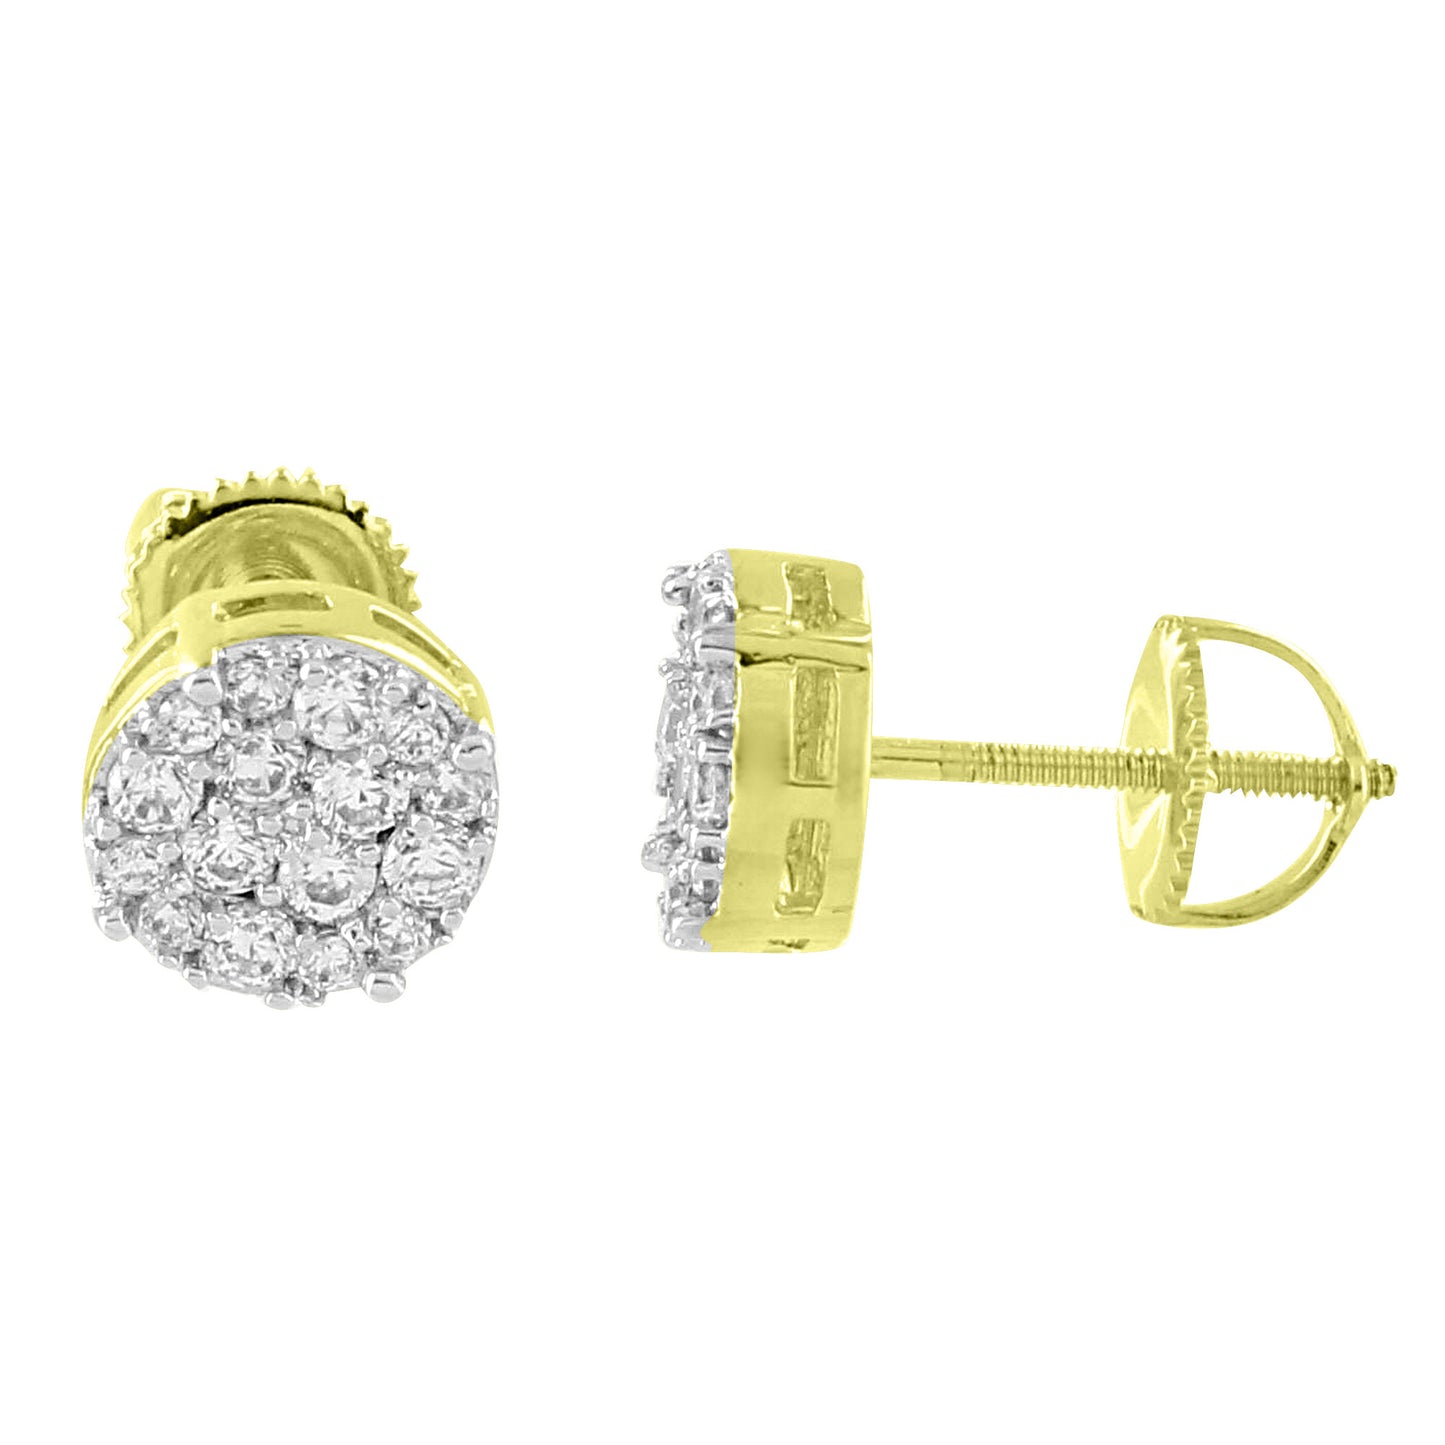 Solitaire Earrrings Cluster Set Round Cut Prong 14K Gold Finish Round Simulated Diamonds